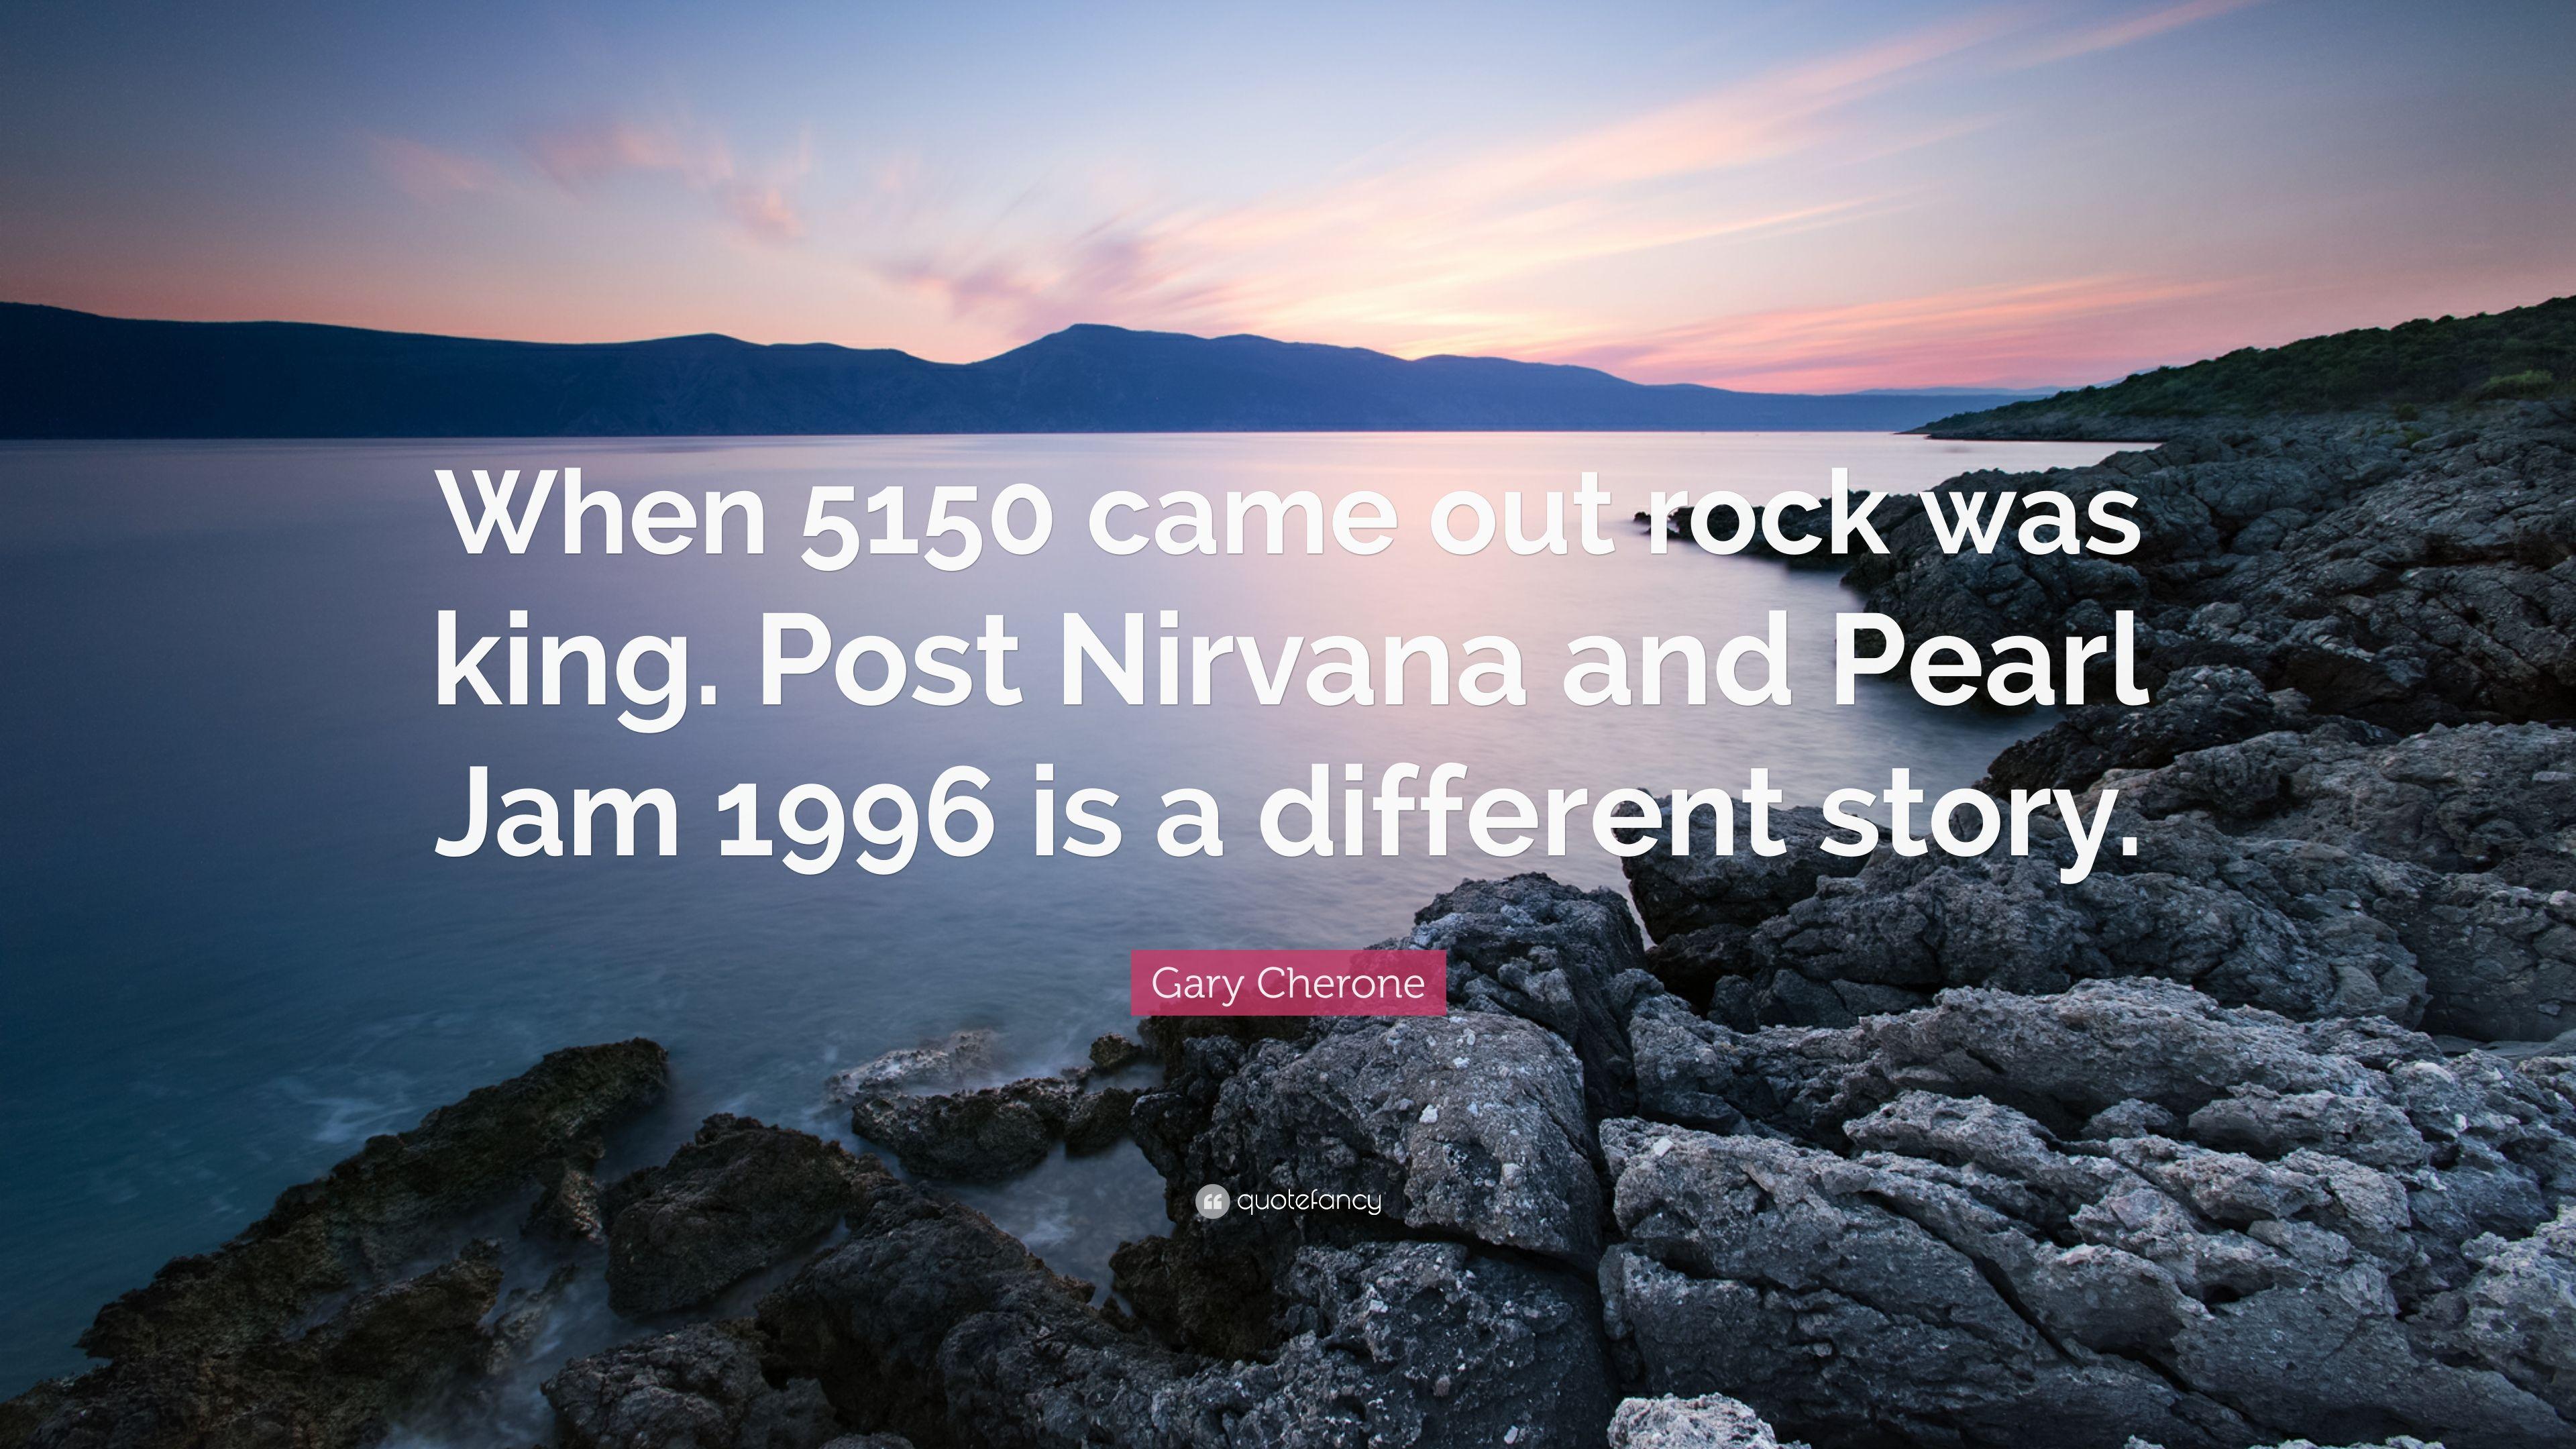 Gary Cherone Quote: “When 5150 came out rock was king. Post Nirvana